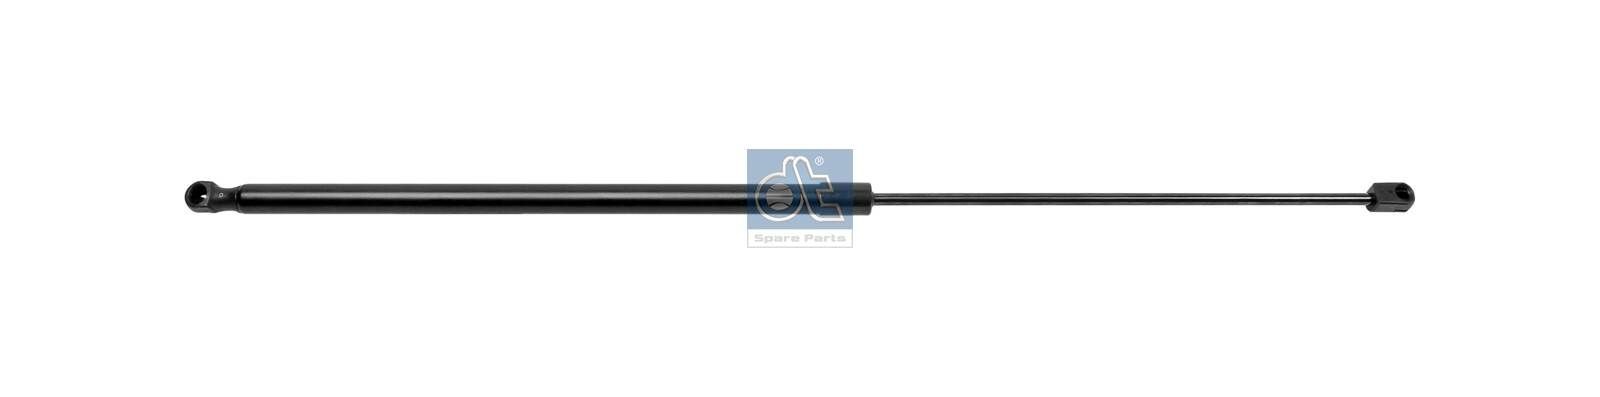 DT Spare Parts 1.23371 Gas Spring 2303289